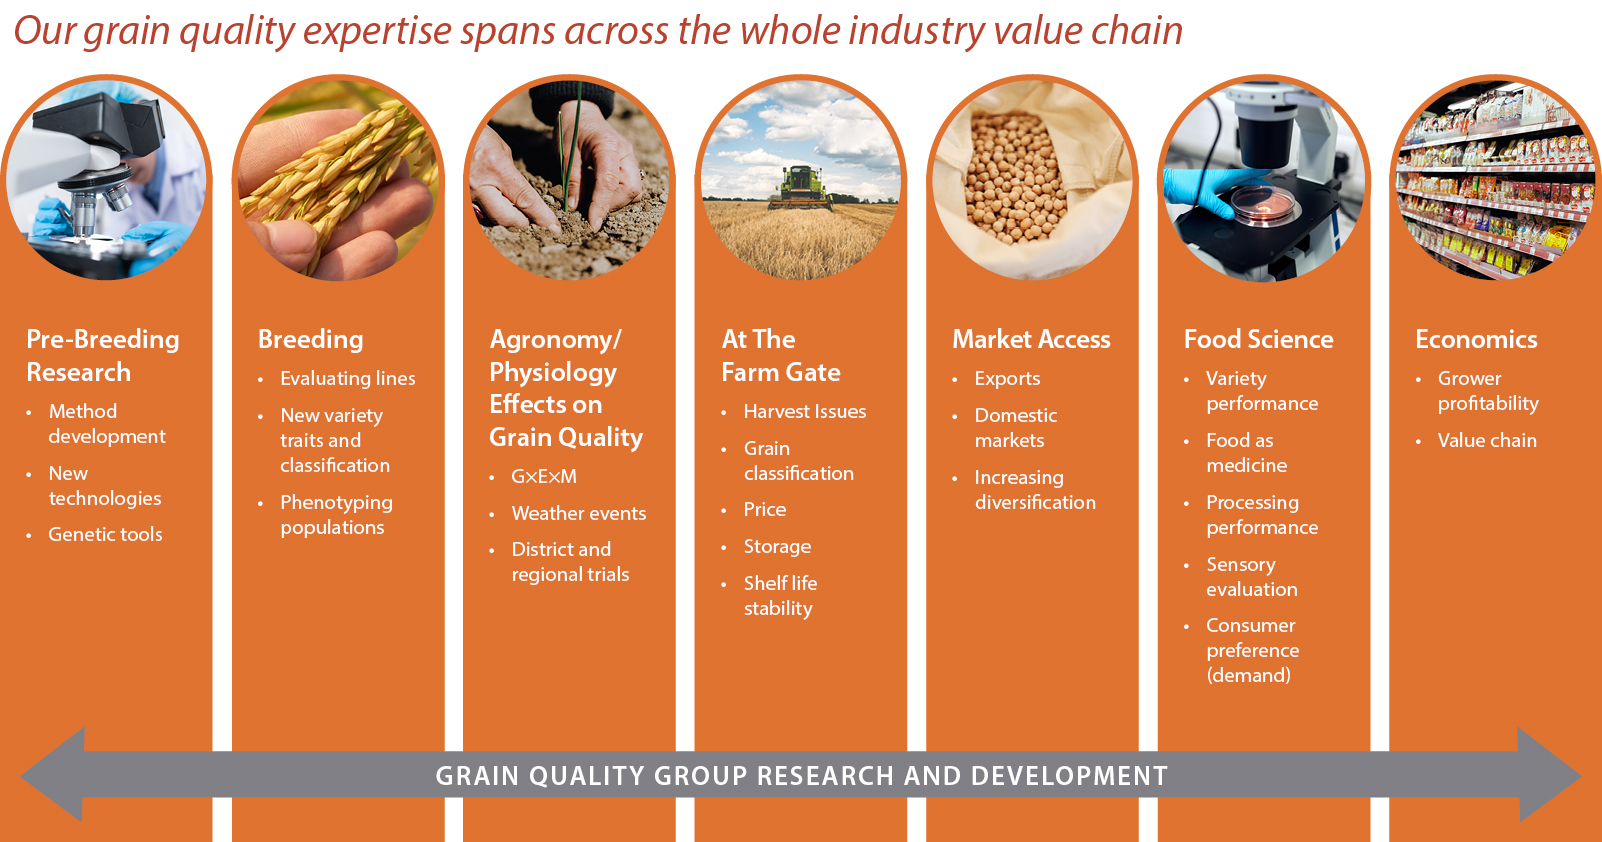 NSW DPI grain quality expertise spans across the whole industry value chain encompassing: Pre-breeding research (method development, new technologies and genetic tools); Breeding (evaluating lines, new variety traits and classification, and phenotyping genetic populations); Agronomy/physiology effects on grain quality (GxExM, weather events and district/regional trials); At the farm gate research (harvest issues, grain classification, price, storage and shelf-life stability); Market access (exports, domestic markets and increasing diversification); Food science (variety performance, food as medicine, processing performance, sensory evaluation and consumer preferences/demand), and Economics (grower profitability and value chain). We have expertise in wheat, grain legumes (like chickpeas, faba bean, mungbean, etc), rice, durum, oilseeds (like canola) and feed grains.